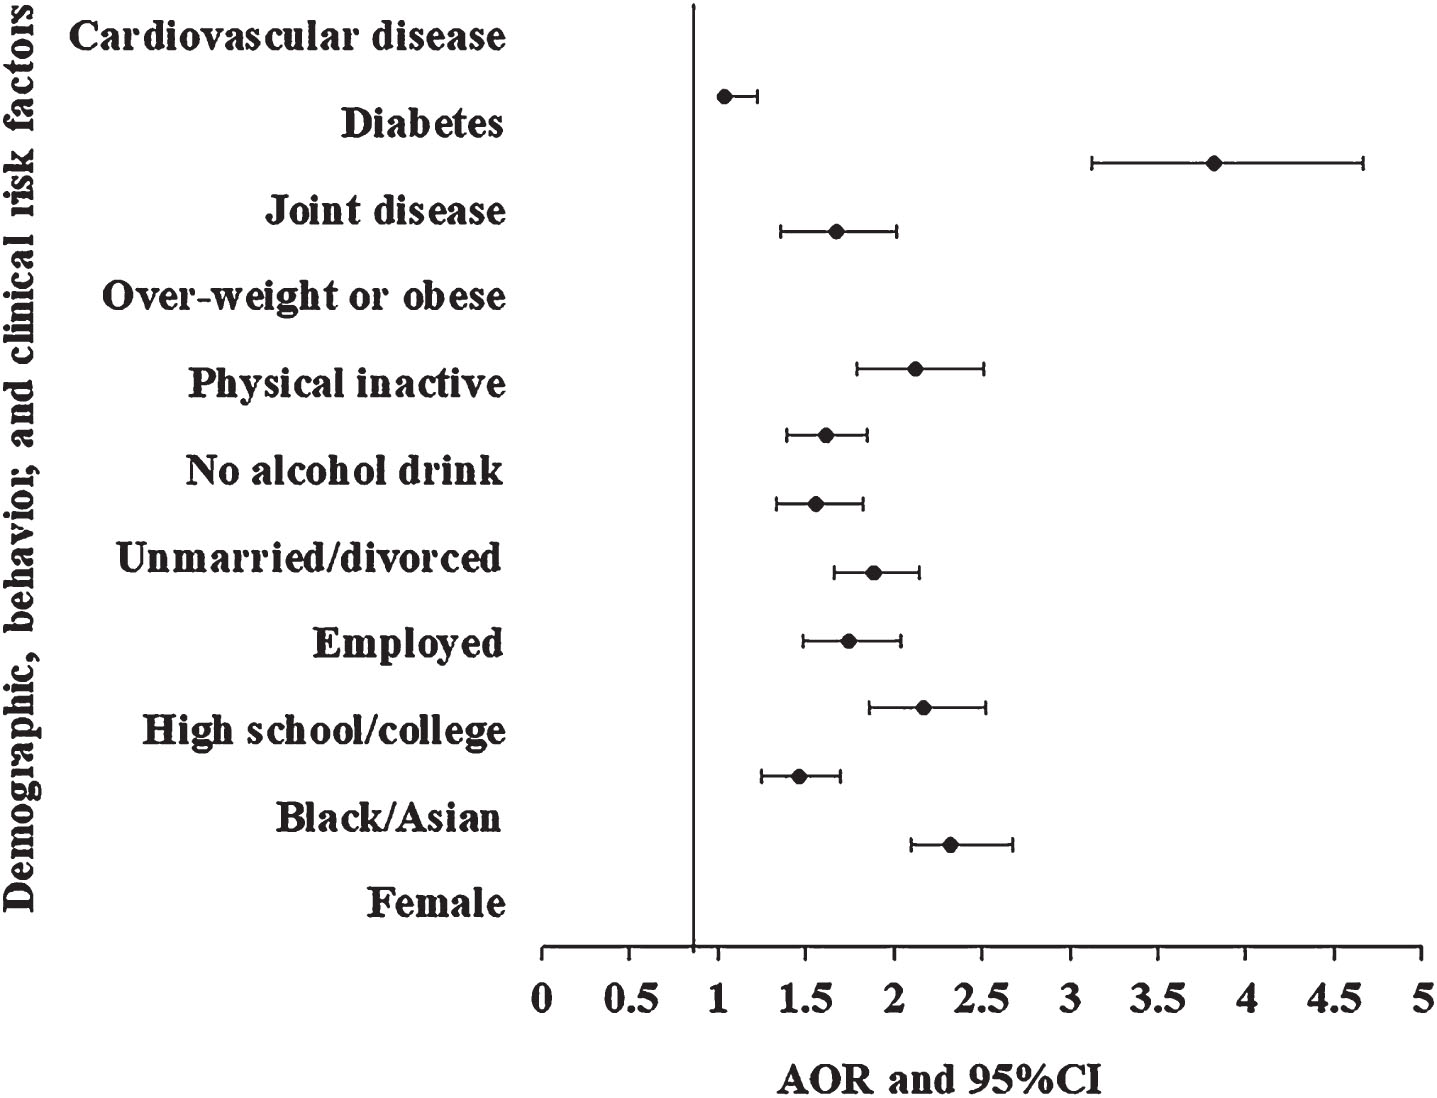 Associations of demographic, behavioral, and clinical risk factors with the risk of asthma among adults who smoked. A dark dot circle represents odds ratios, and bars show a 95% confidence interval.